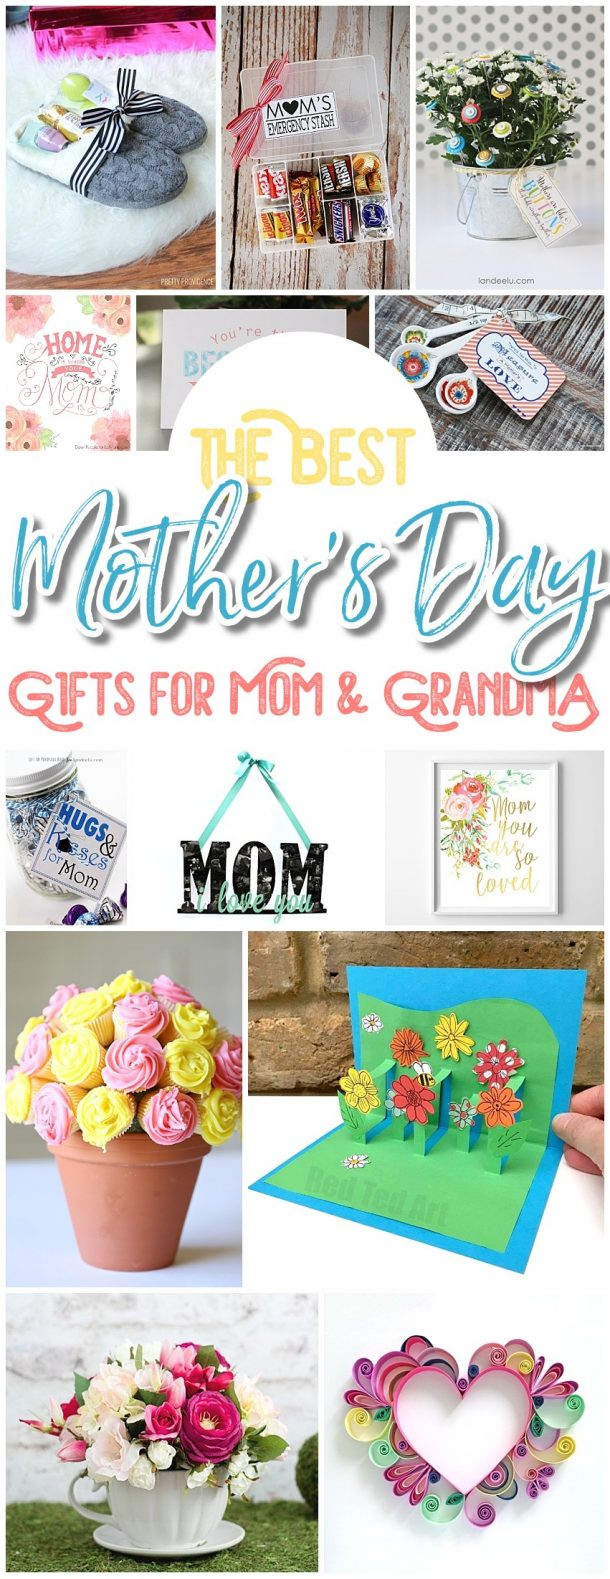 Easy Mother'S Day Gift Ideas
 The BEST Easy DIY Mother’s Day Gifts and Treats Ideas